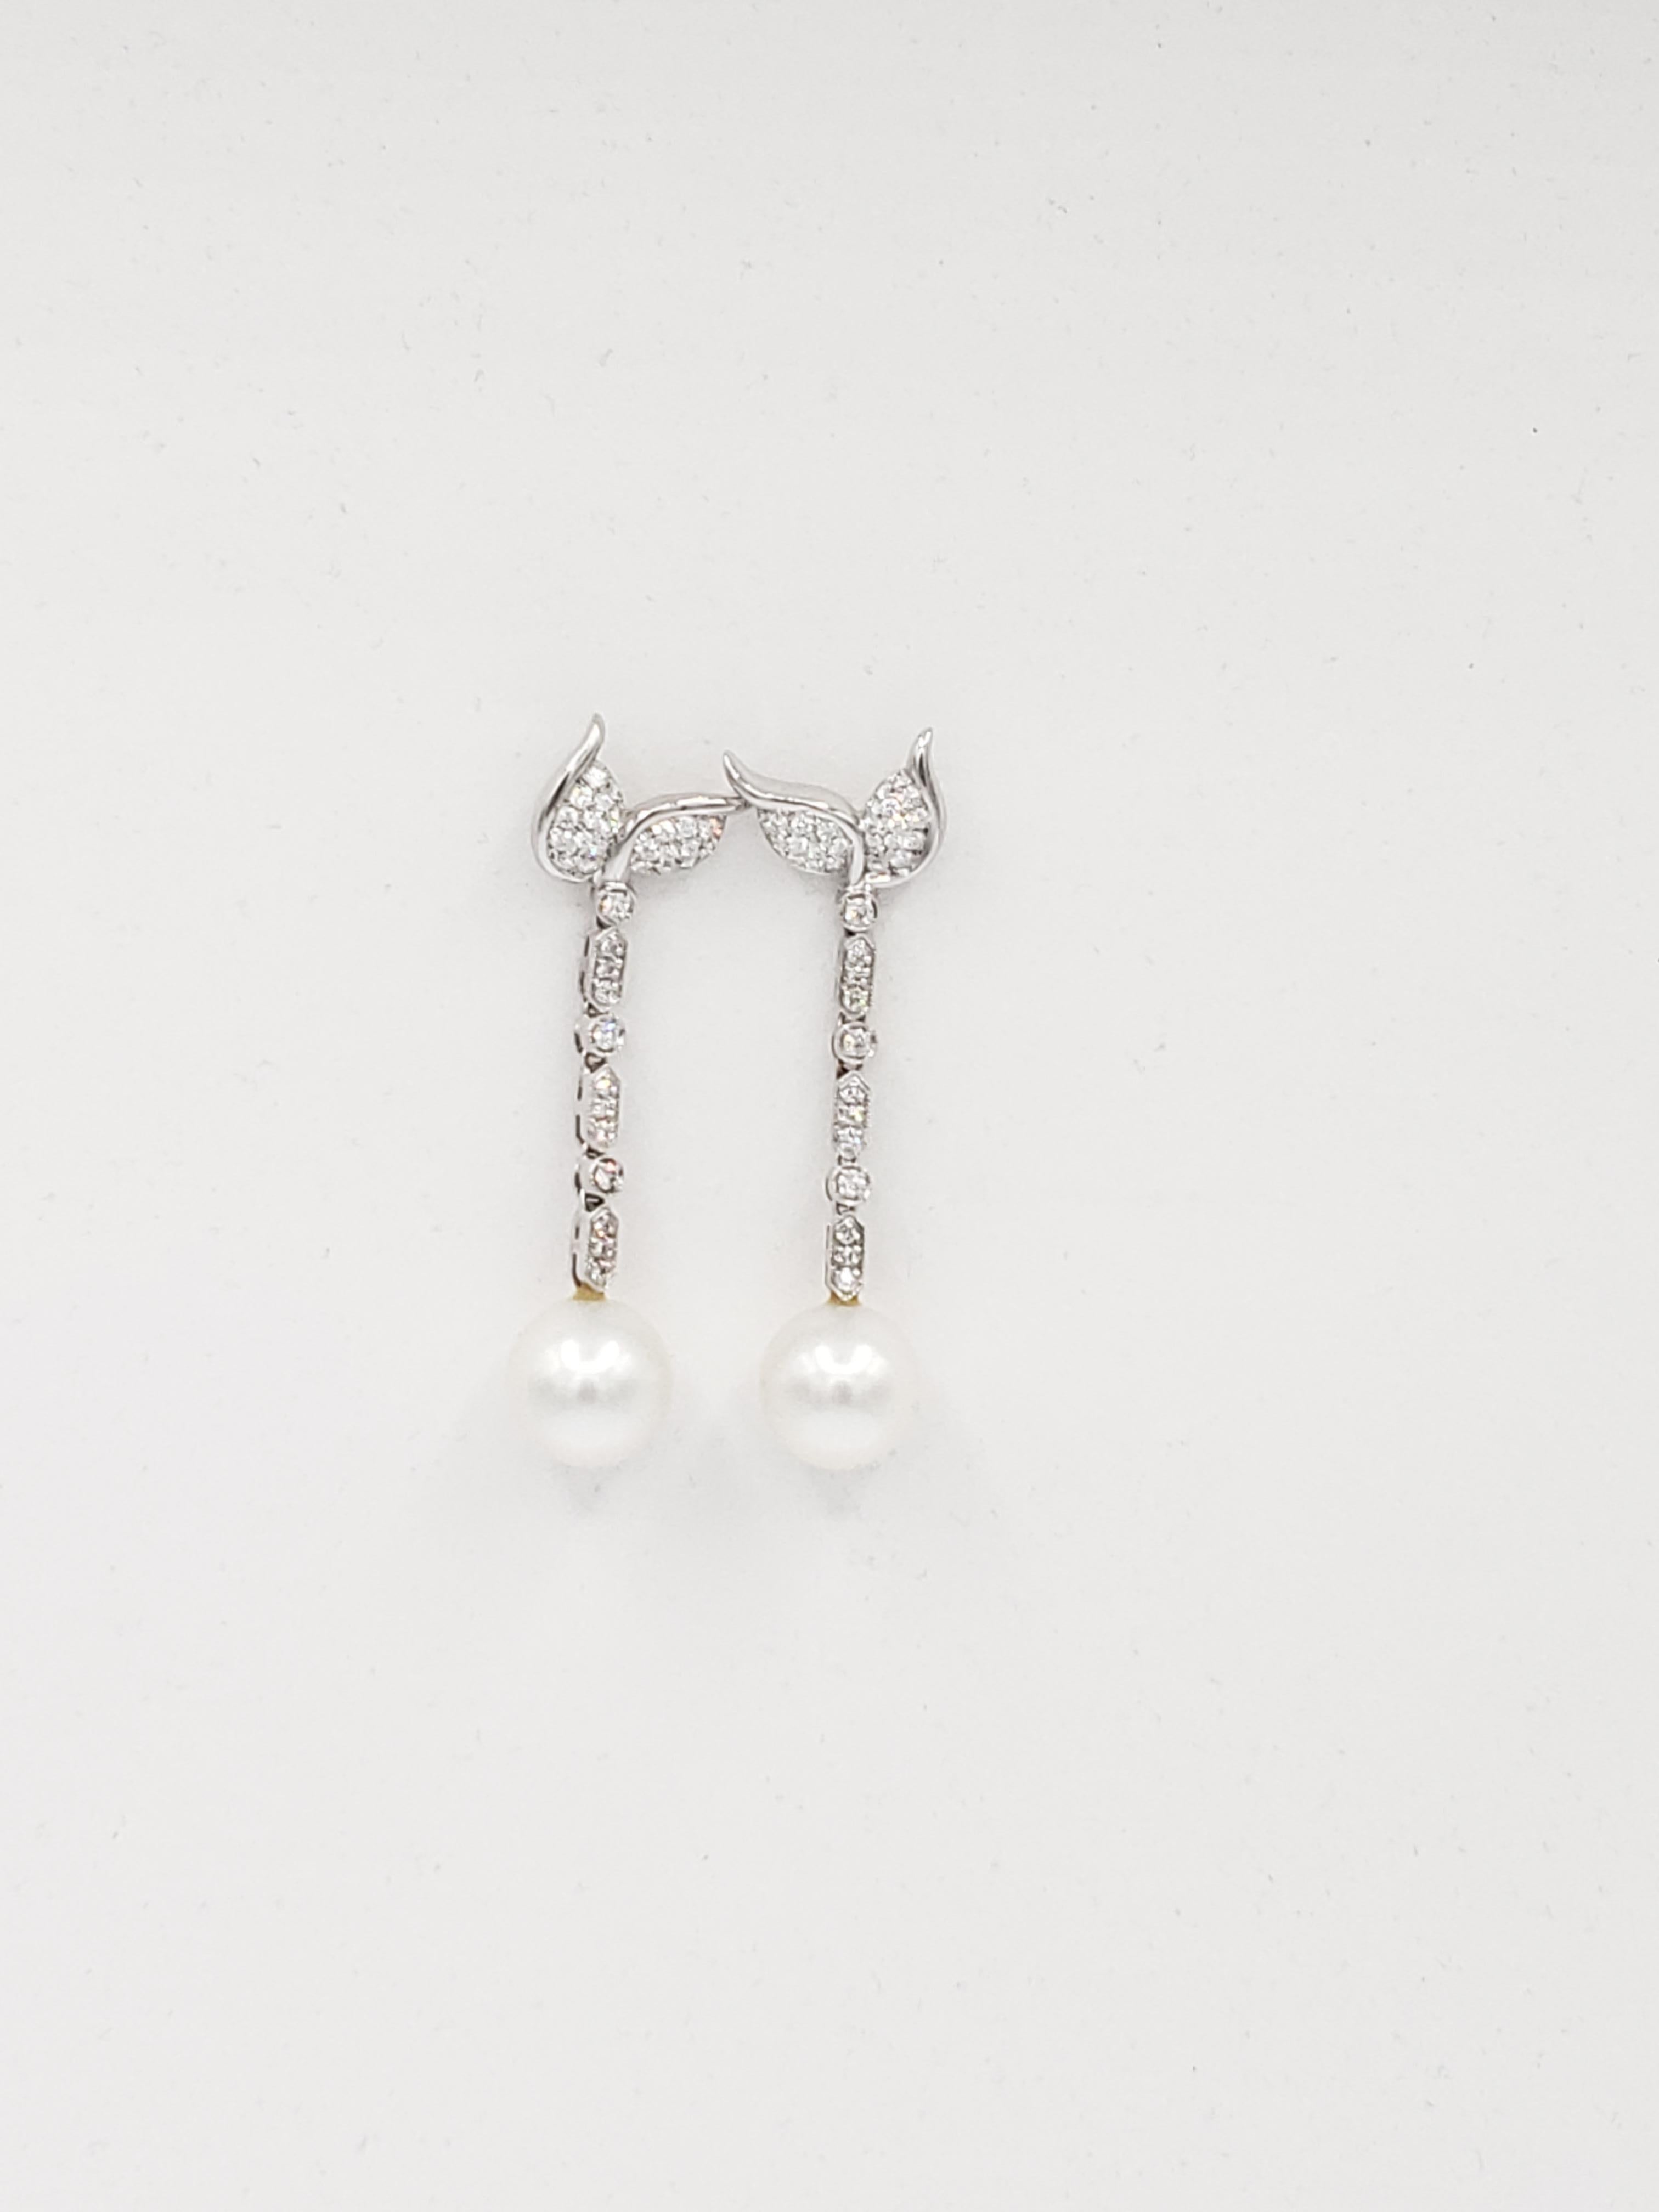 Victorian NEW Perfectly Round  White Top -Quality South Sea Pearls Diamond Drop Earrings  For Sale